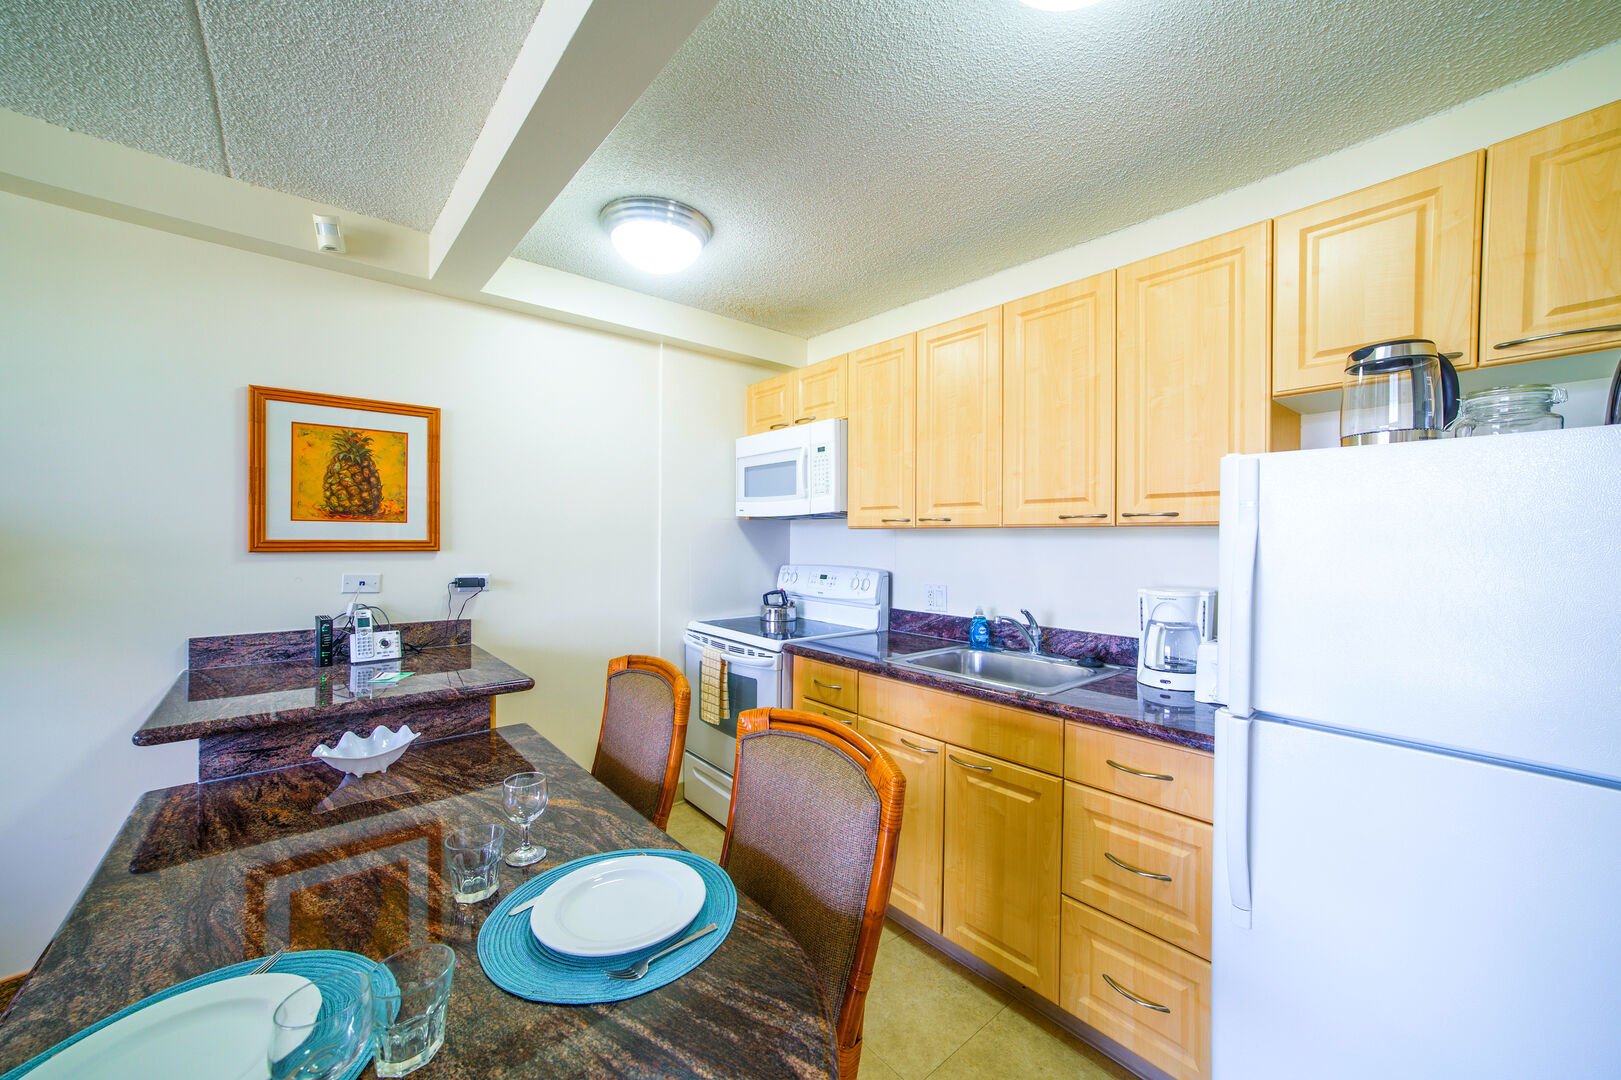 Fully equipped kitchen, complete with oven, stove, microwave, and refrigerator